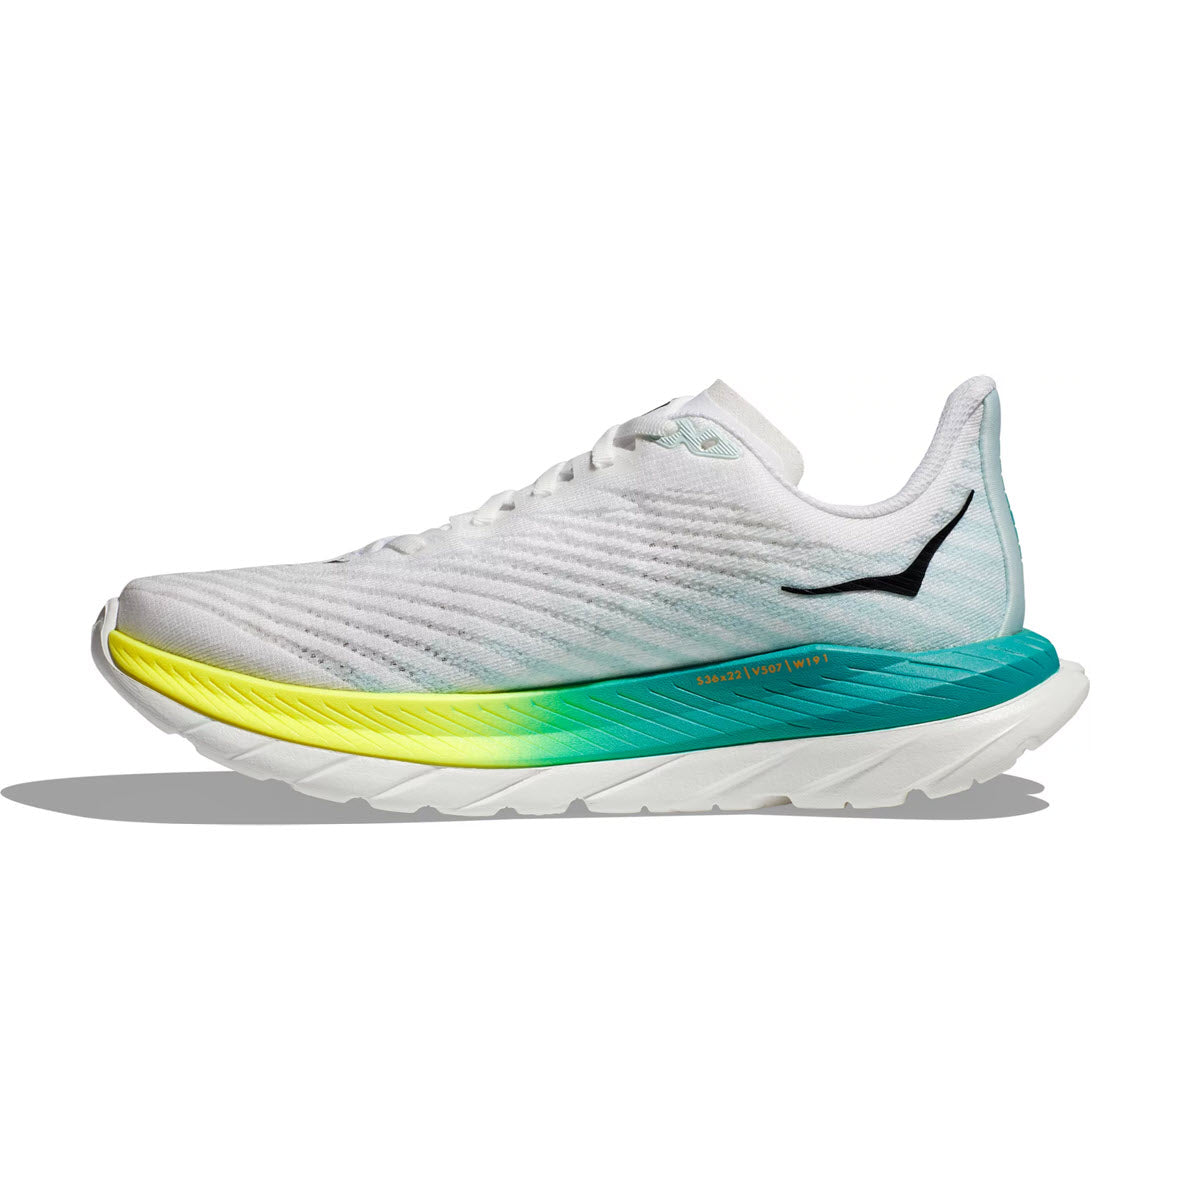 White and turquoise Hoka MACH 5 running shoes with a yellow to green gradient on the PROFLY midsole and a black logo on the side.